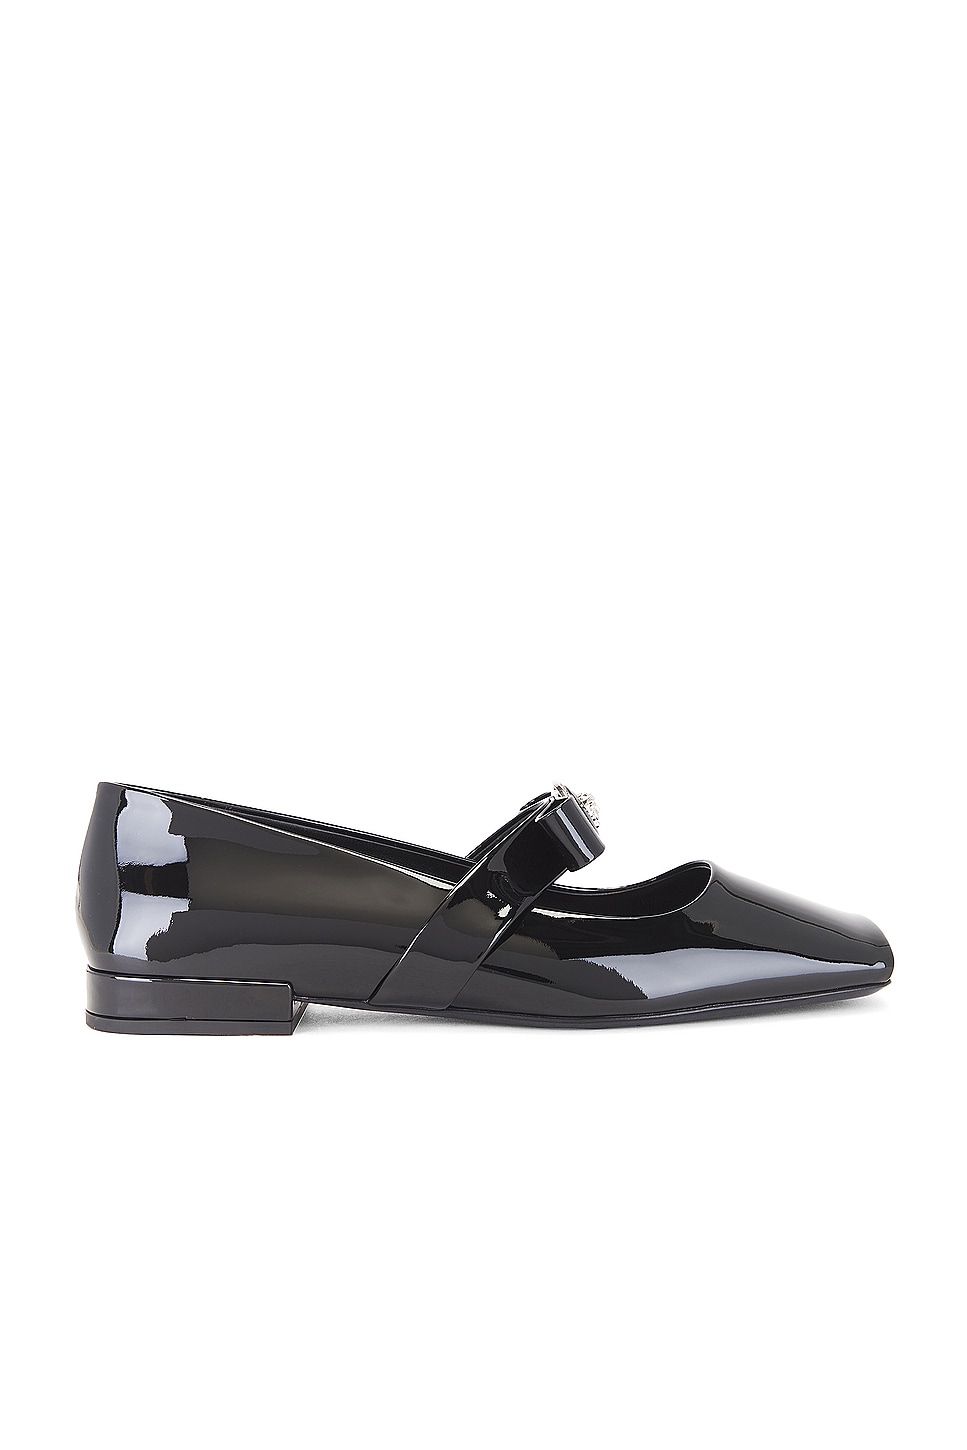 Image 1 of VERSACE Mary Jane Flat in Black